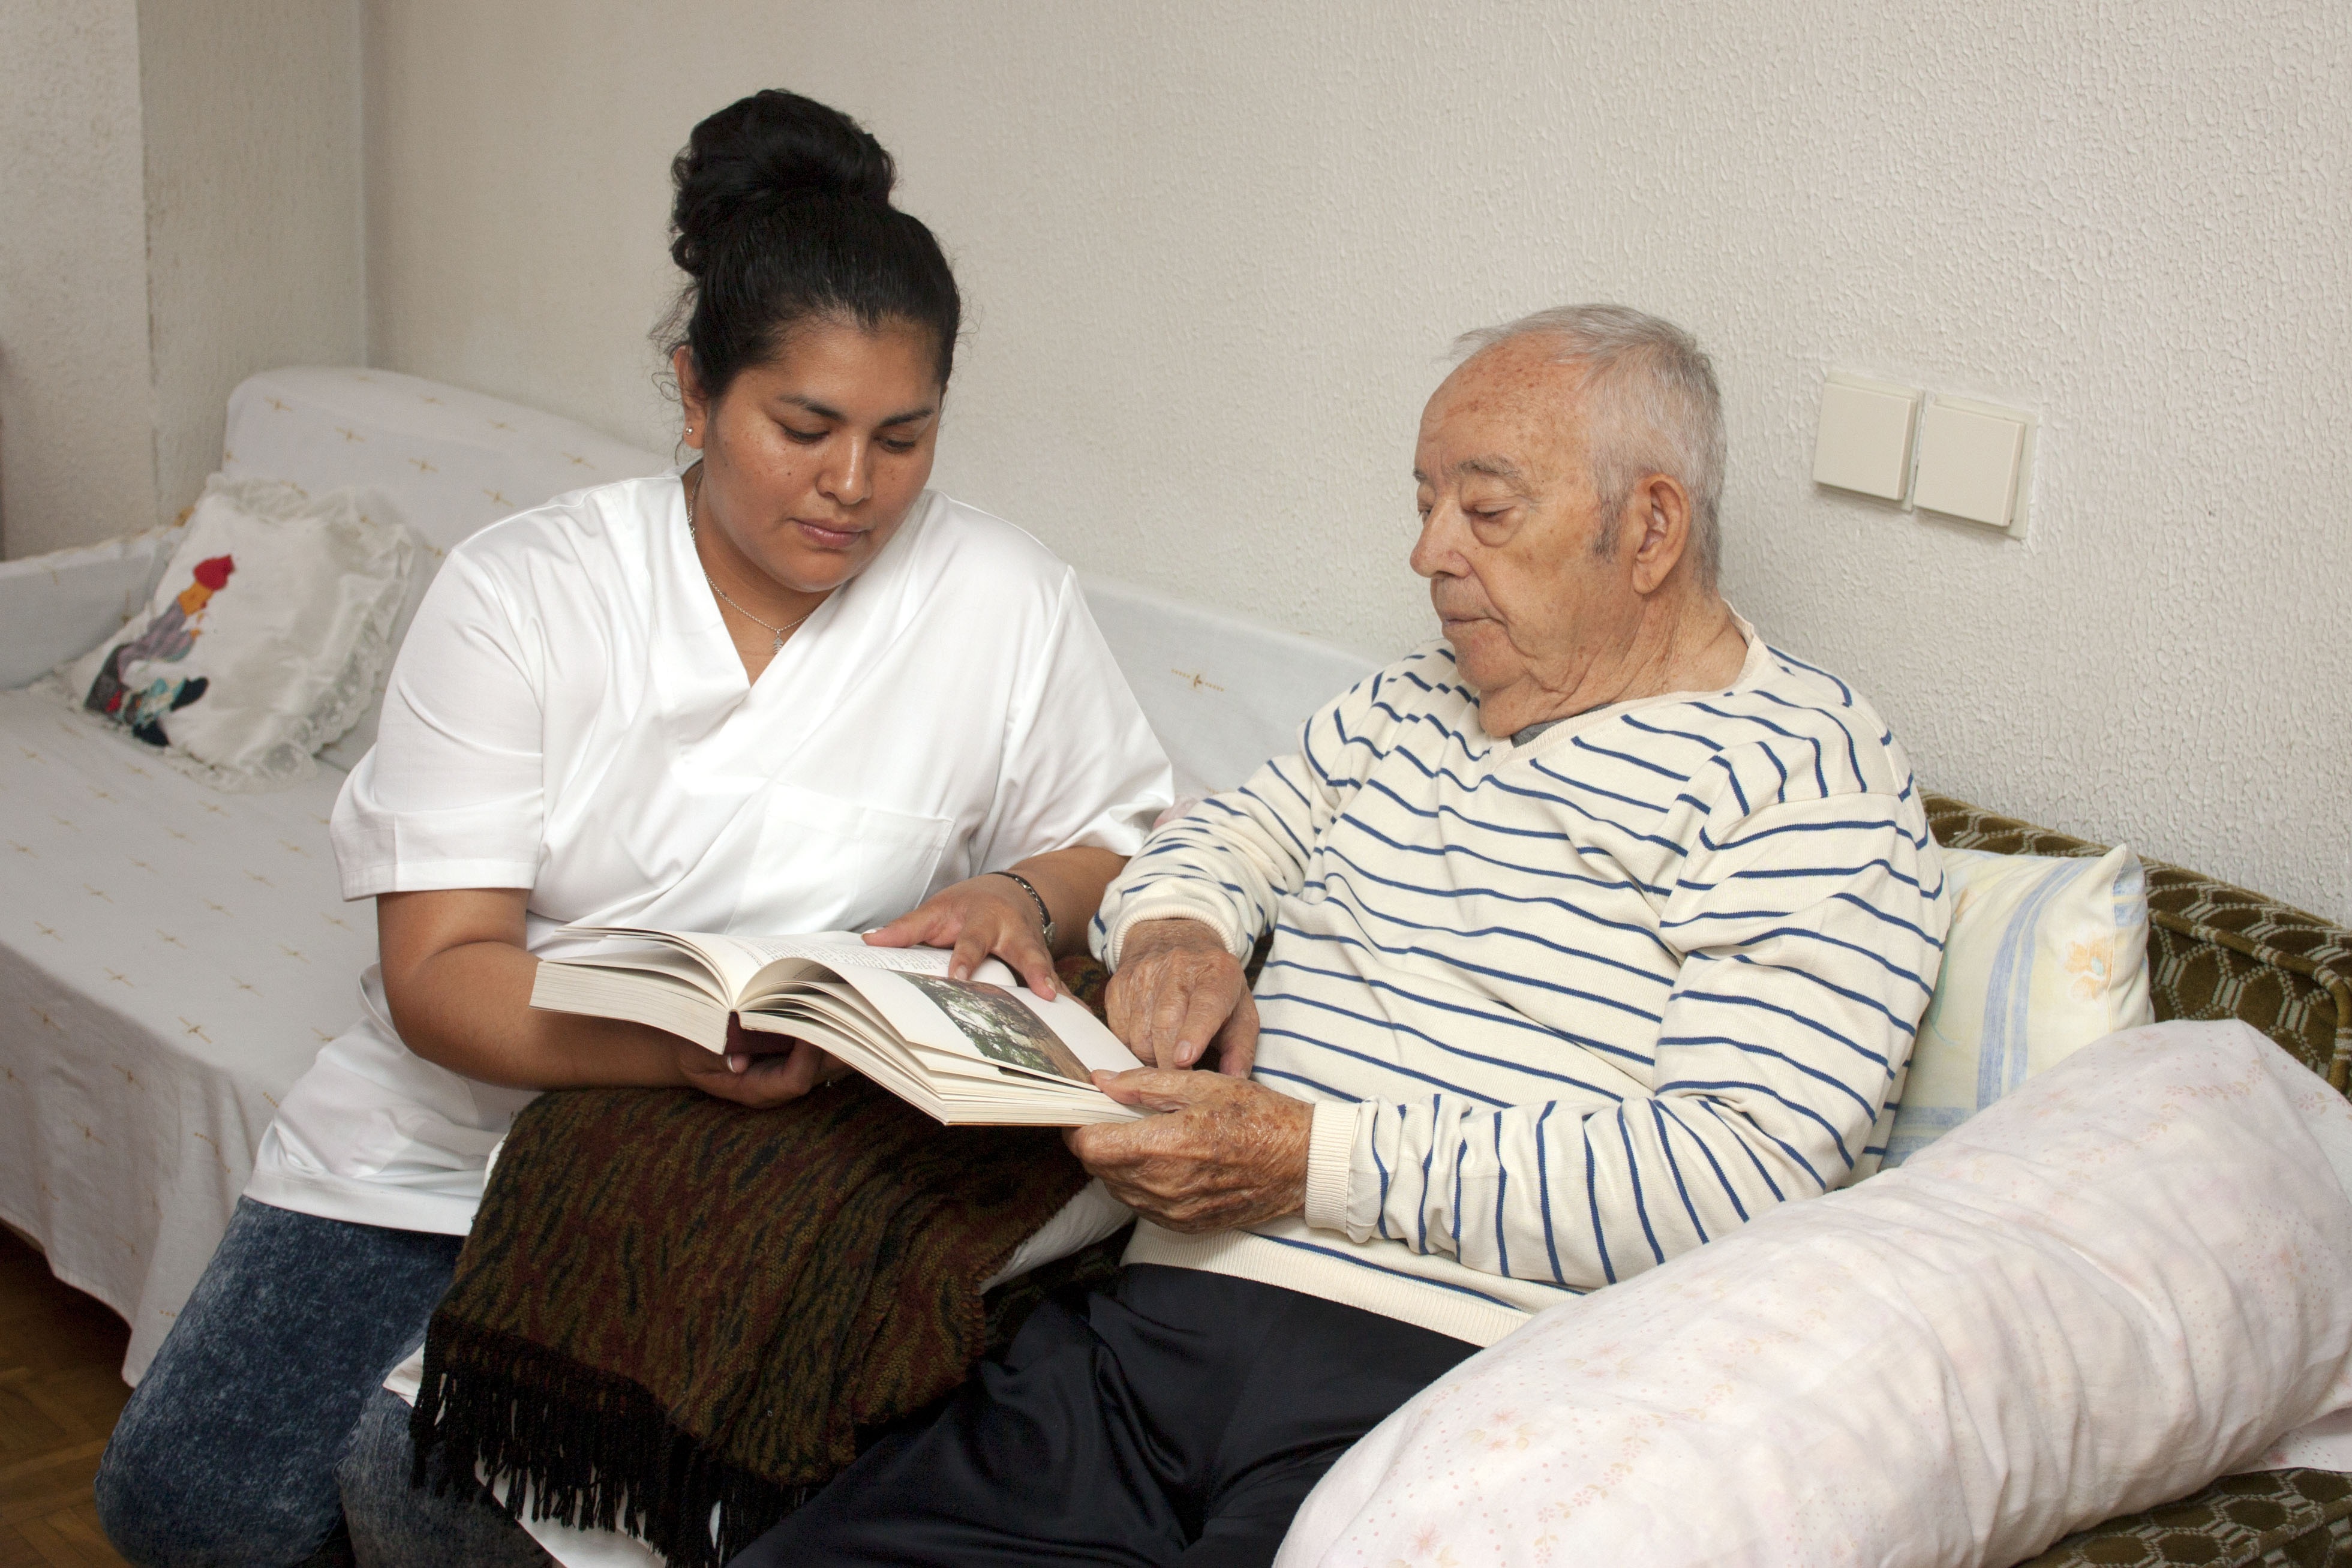 A woman is assisting an elderly man in reading a book